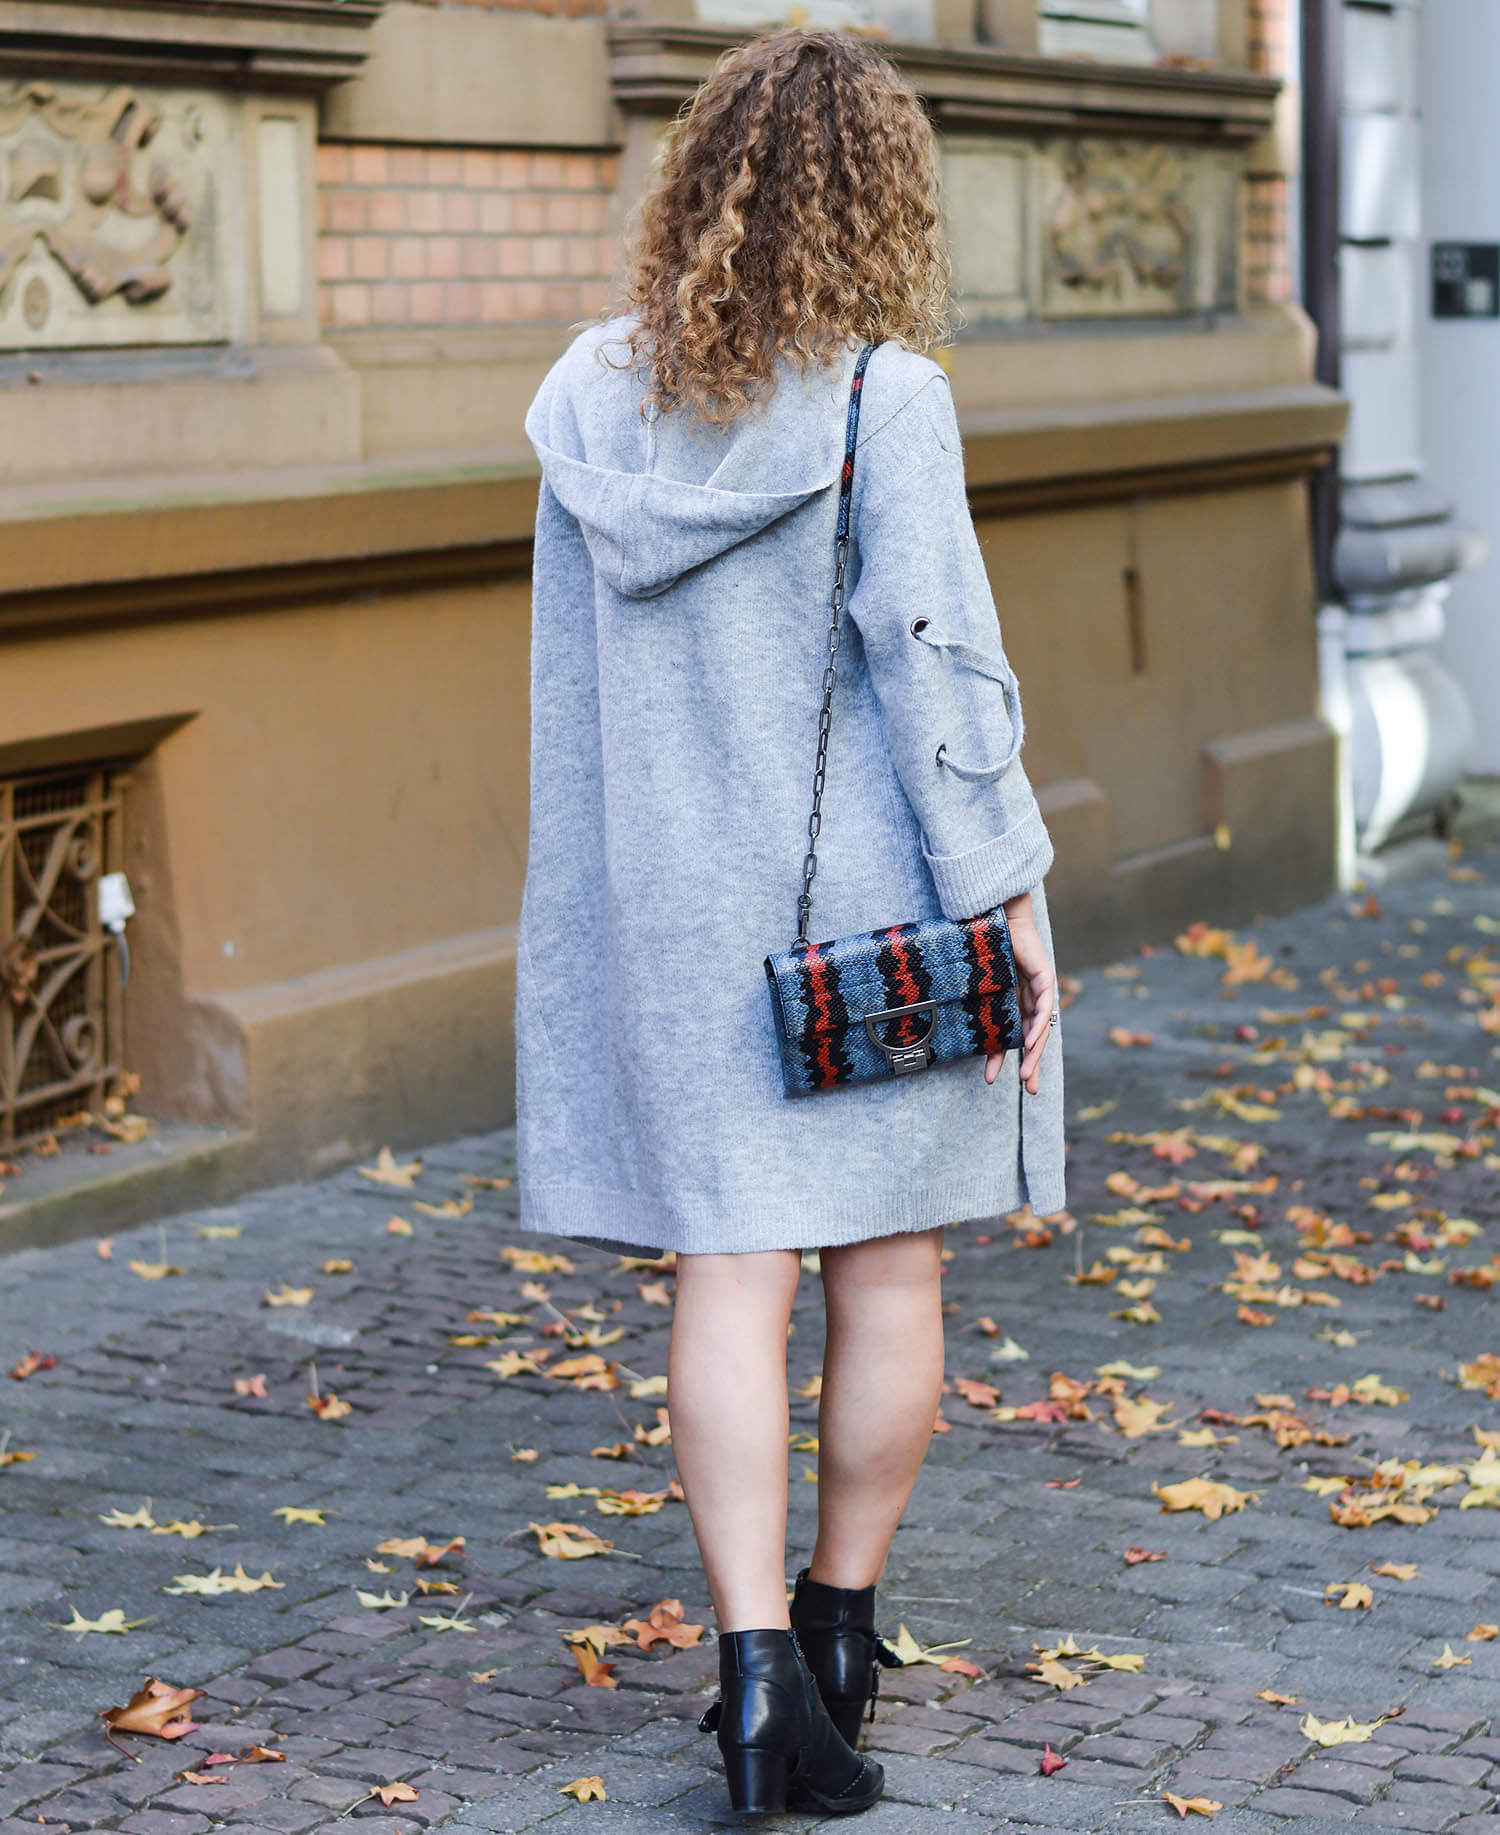 Kationette-fashionblogger-nrw-Outfit-Grey-Cardigan-Satin-Top-Zara-Leather-Skort-and-Booties-for-Indian-Summer